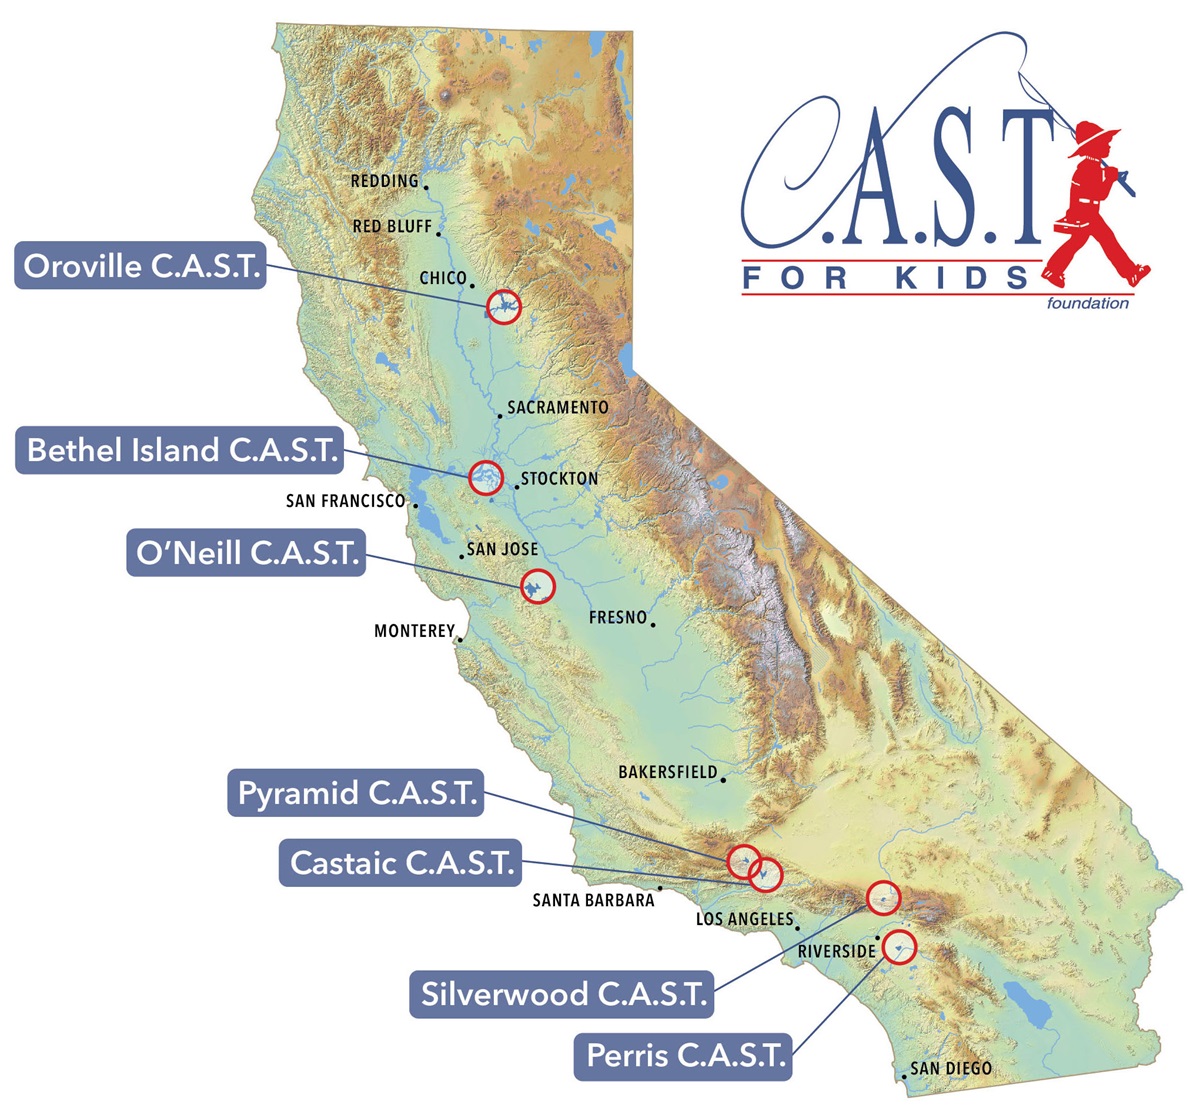 Map showing locations of CAST for Kids event in California. If you need more about this map, please contact accessibility@water.ca.gov.